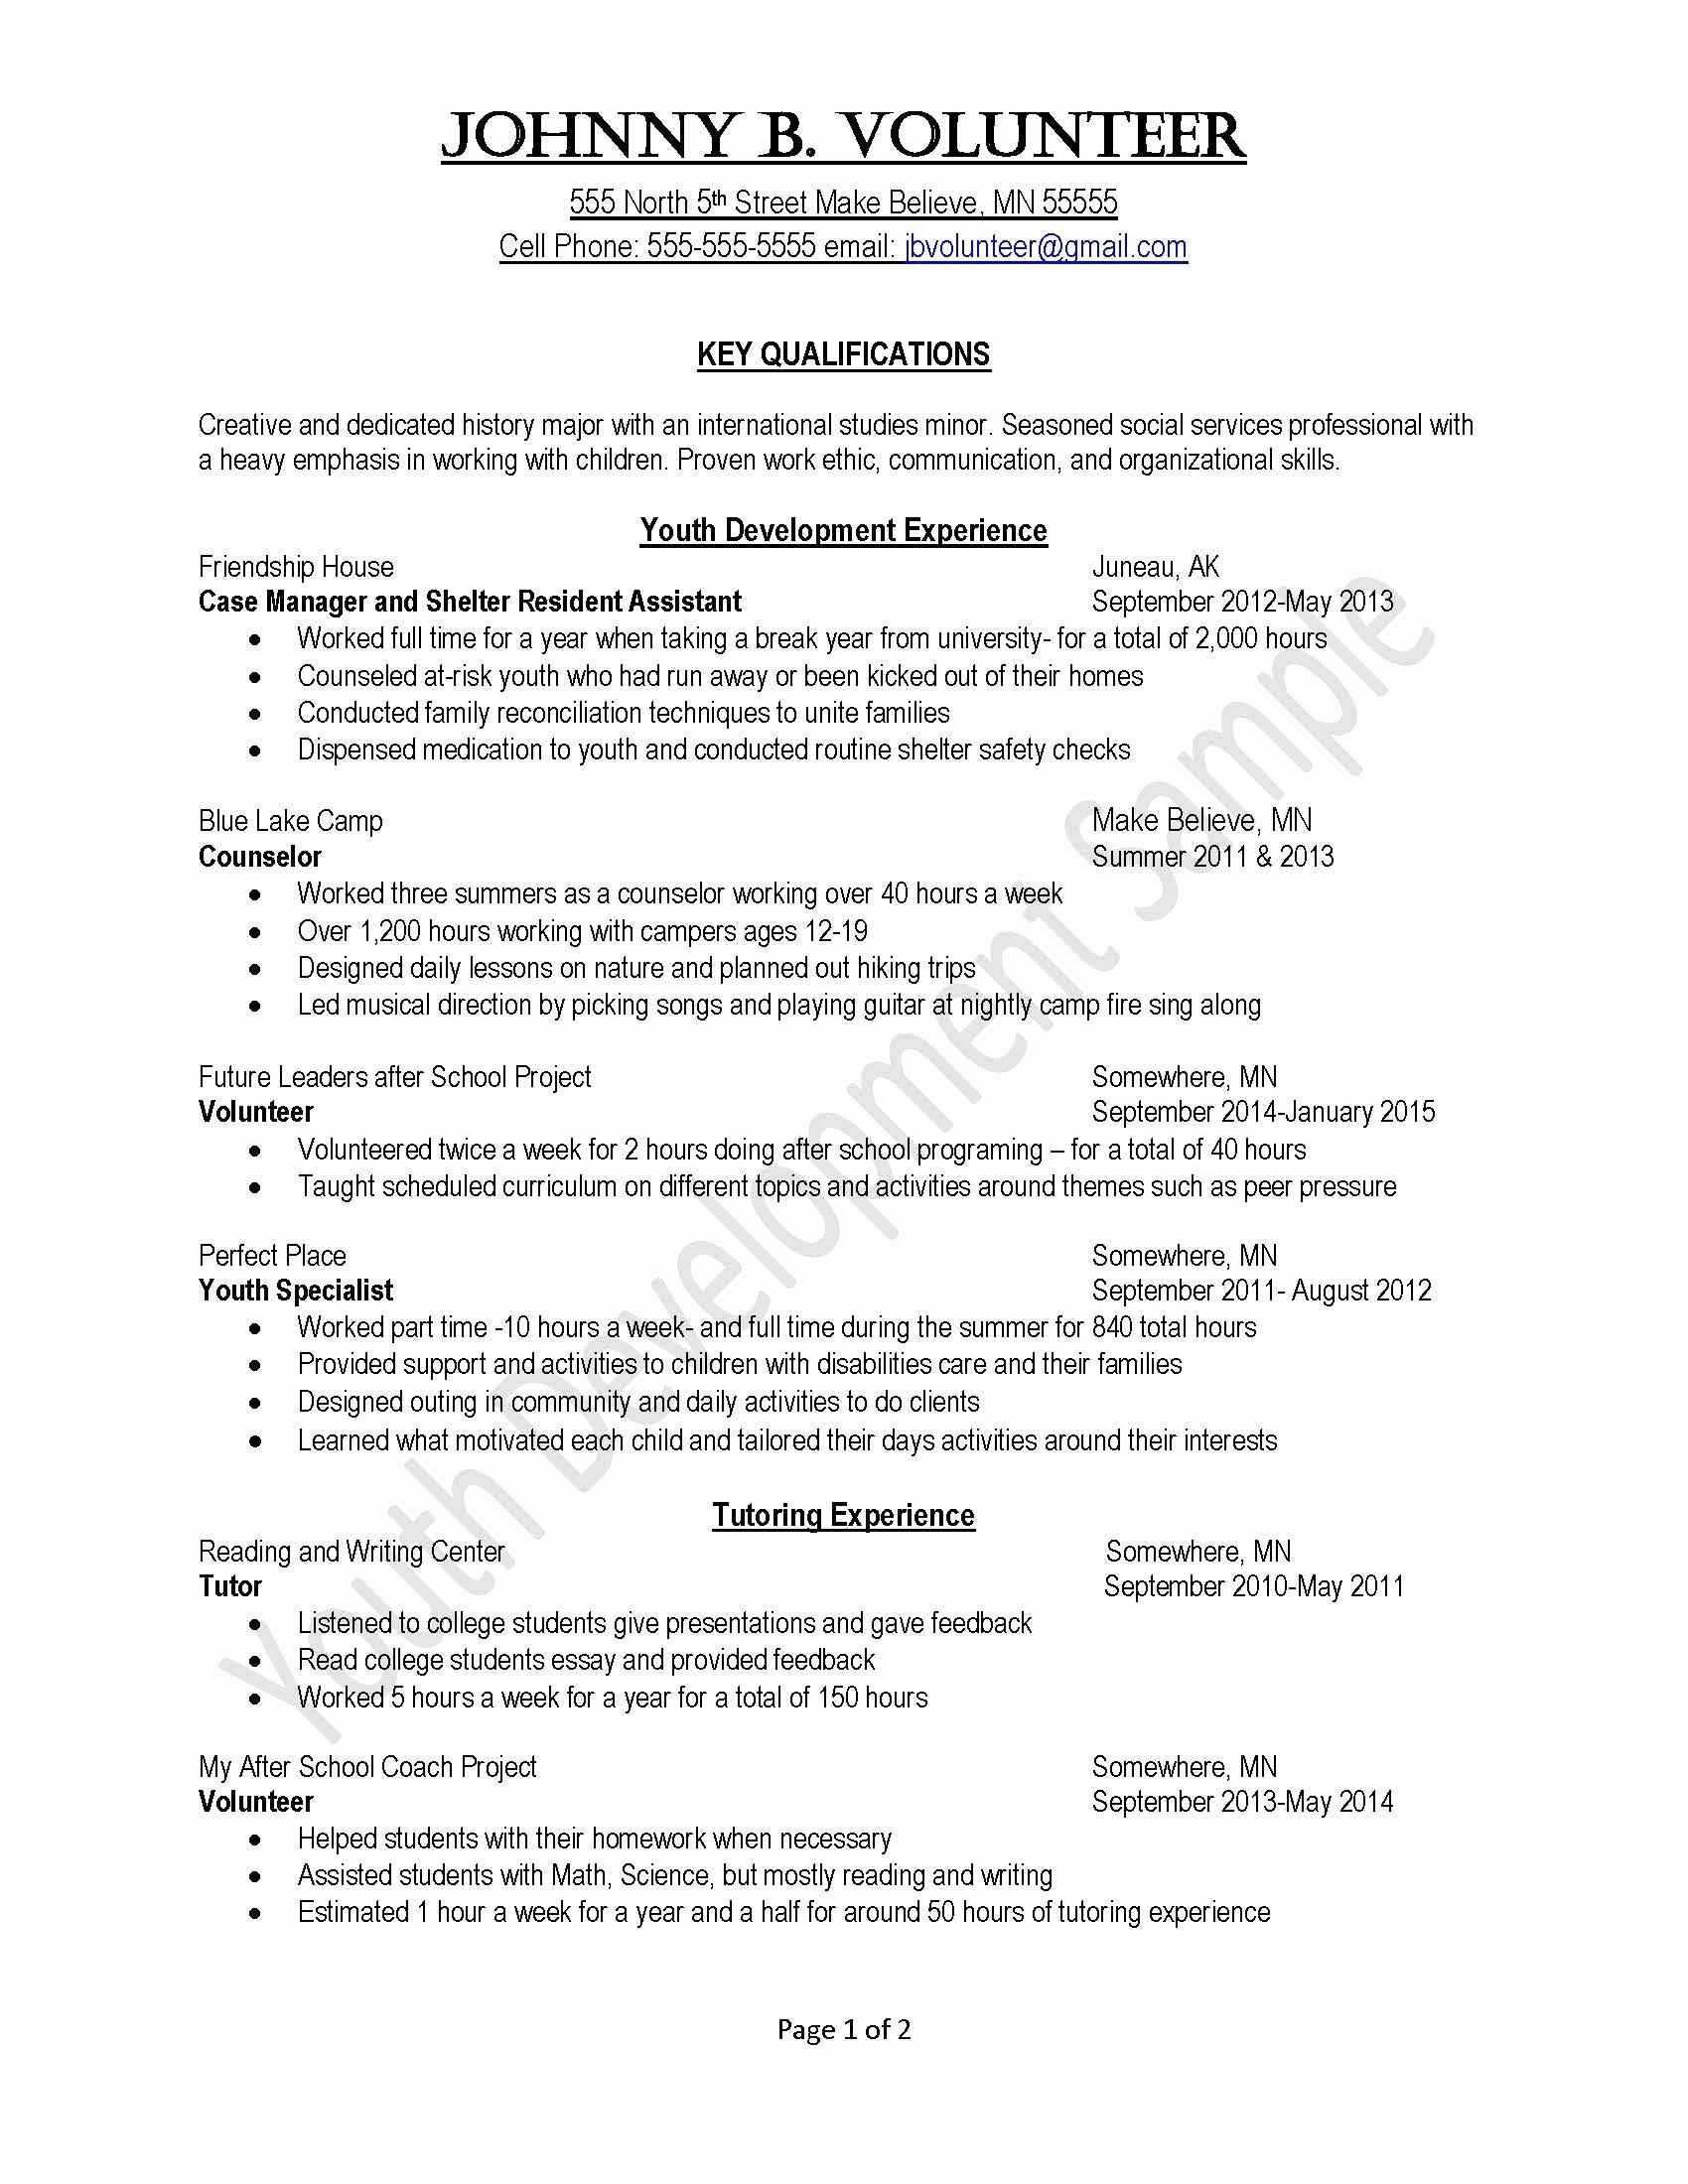 Science tools Worksheet as Well as What is A School Worksheet Refrence Lesson Plan for Excel